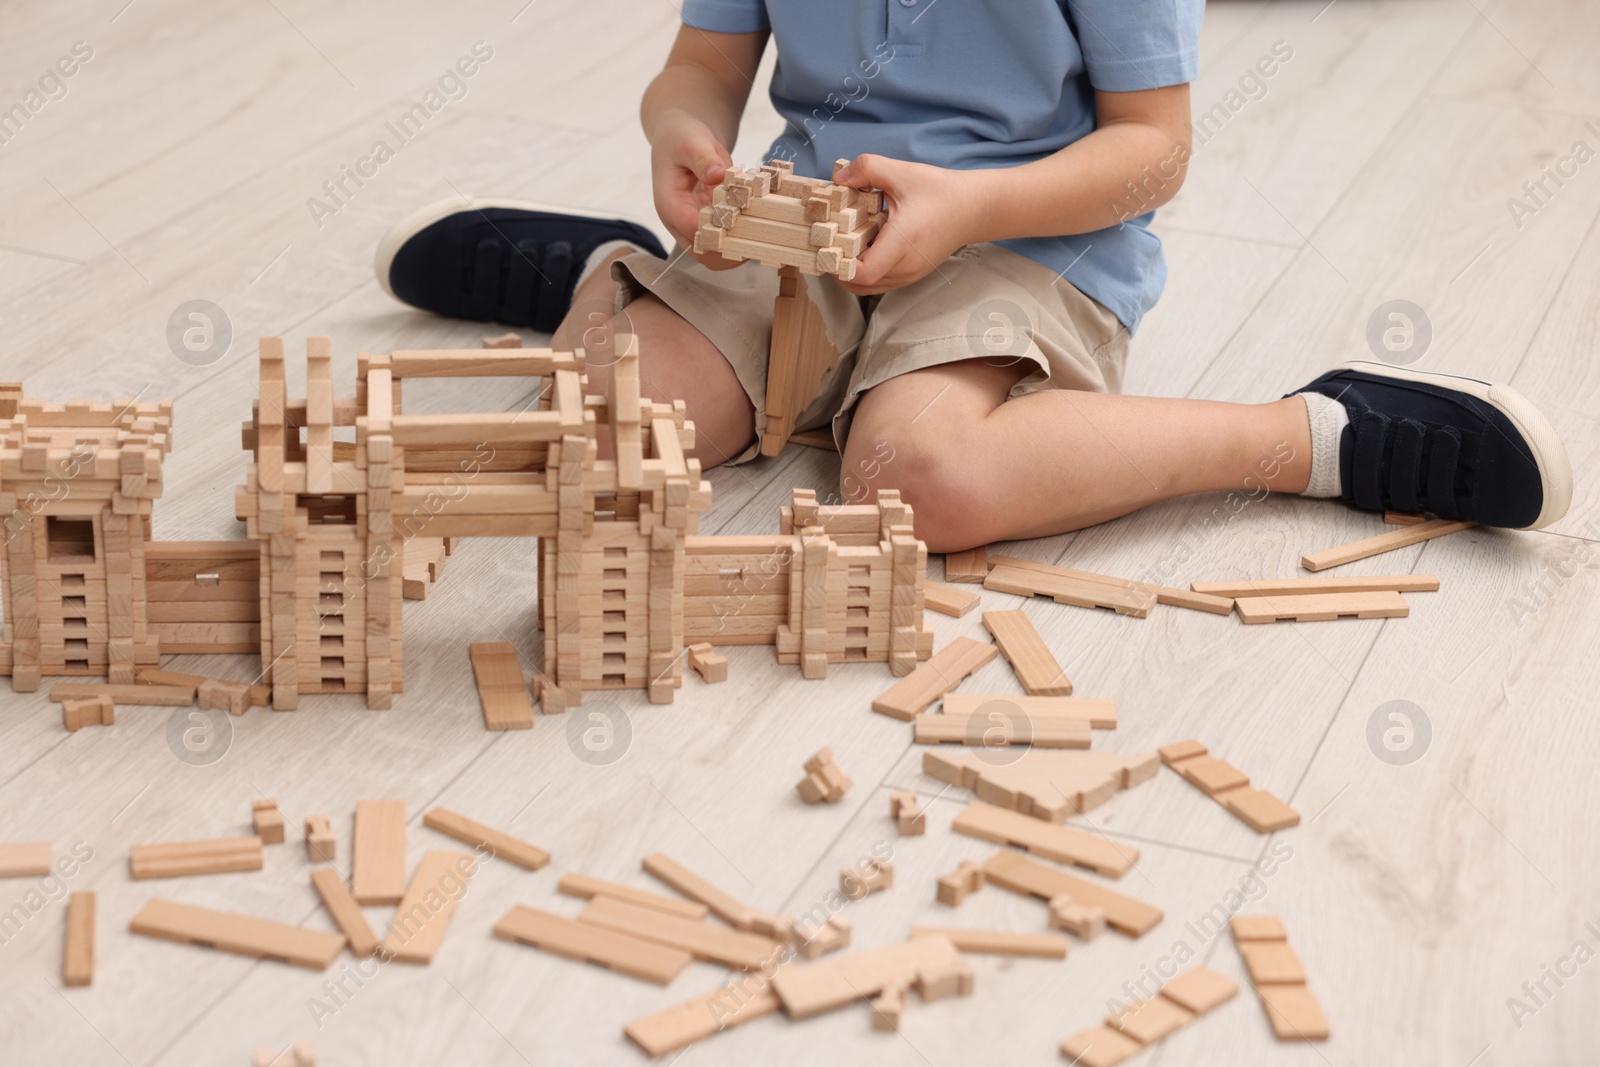 Photo of Little boy playing with wooden construction set on floor in room, closeup. Child's toy